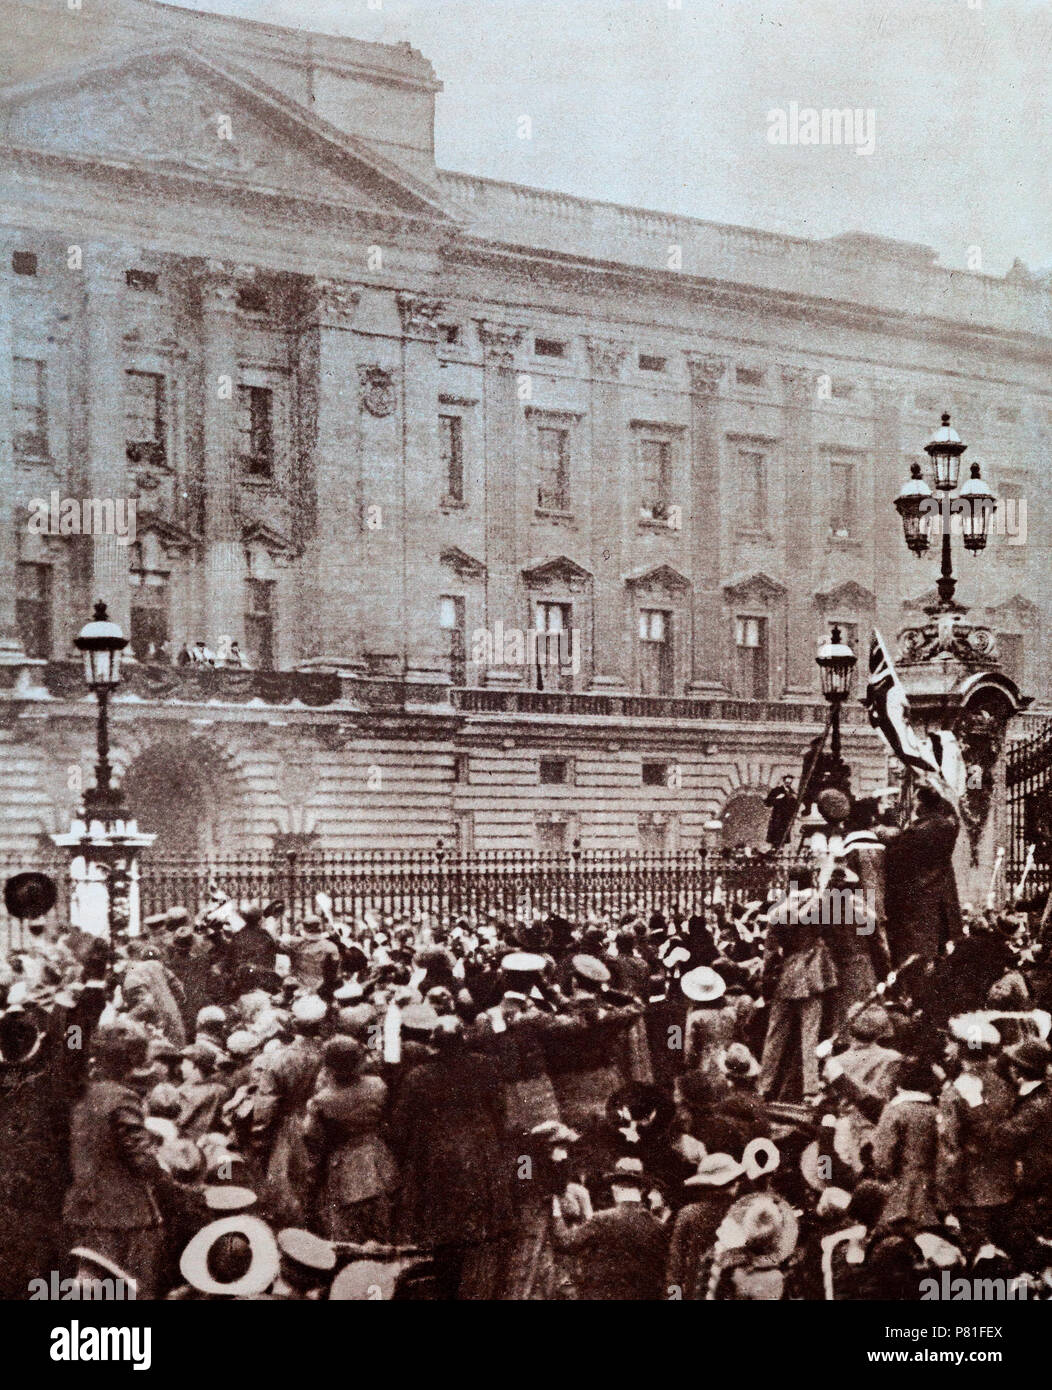 Scenes of jubliation and joyas crowds cheer the Royal Family on the balcony of Buckingham Palace following the signing of the Armistice on the 11 November 1918. Stock Photo